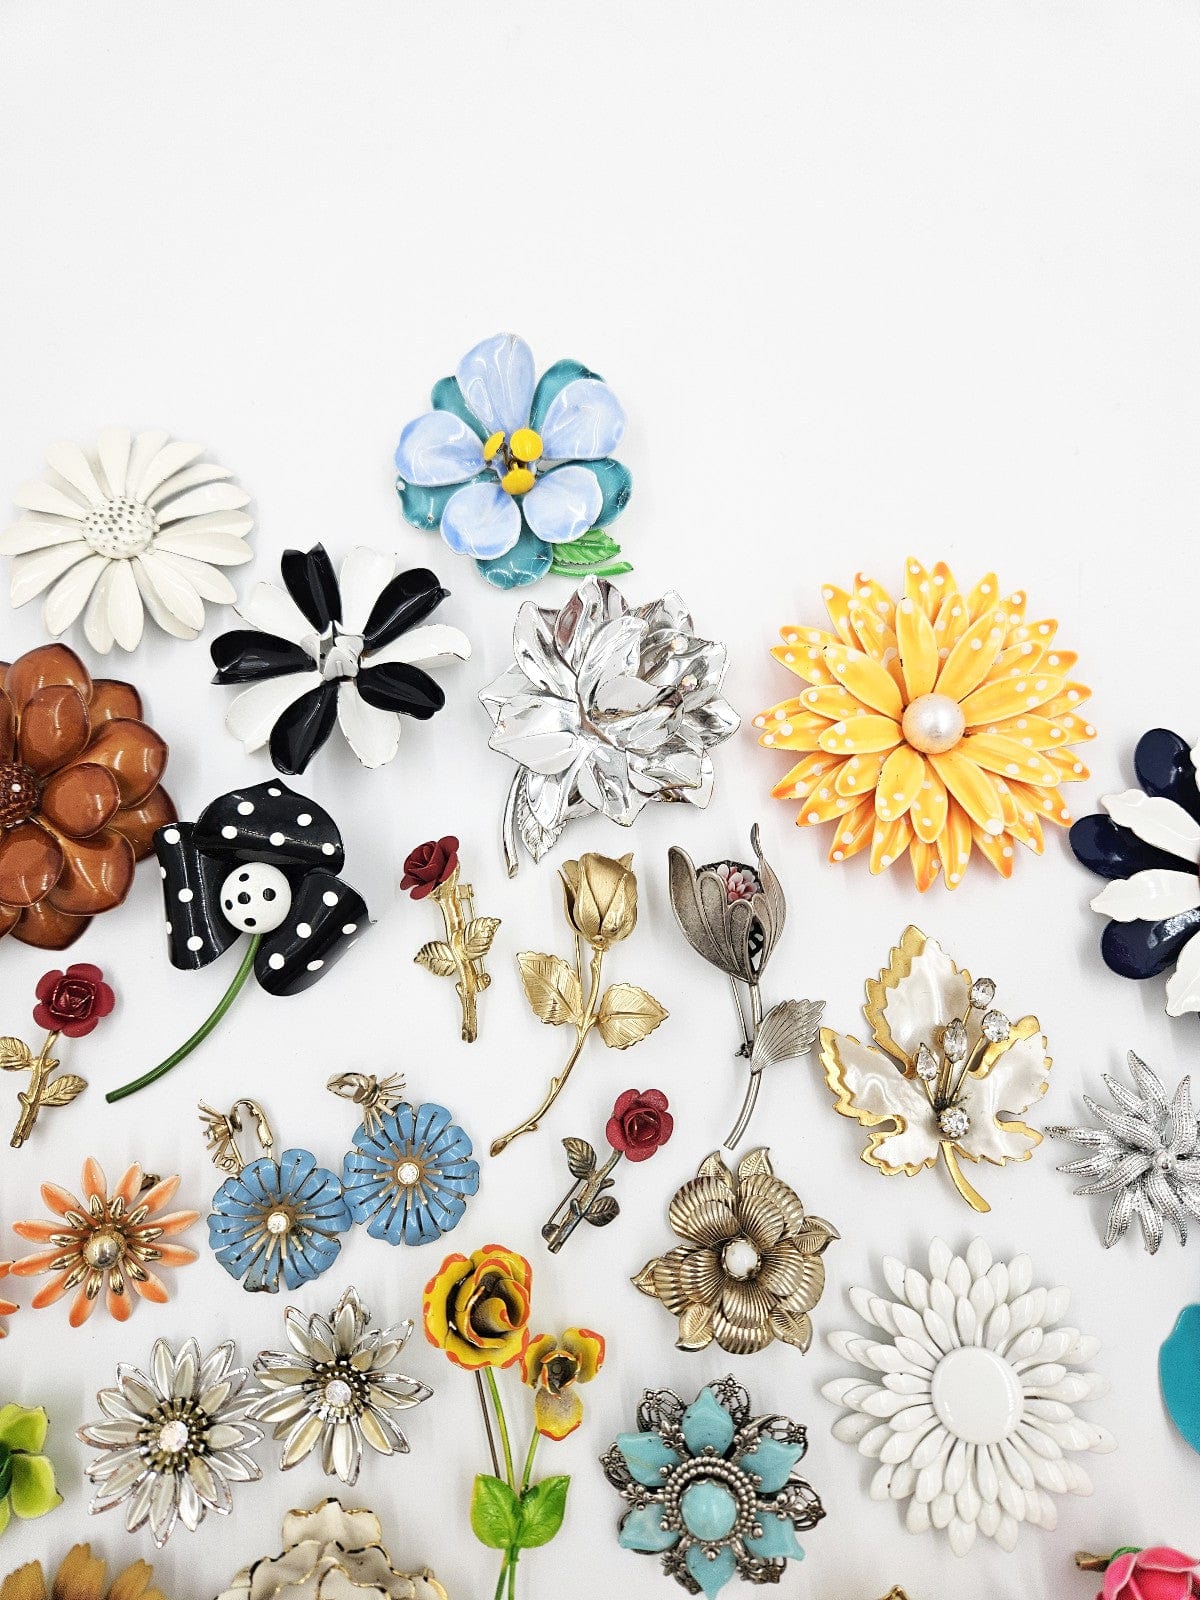 Costume Jewelry Flower Lot Jewelry 50/60's Flowers Brooches Earrings Large Lot Kramer Sarah C Park Lane Giovanni